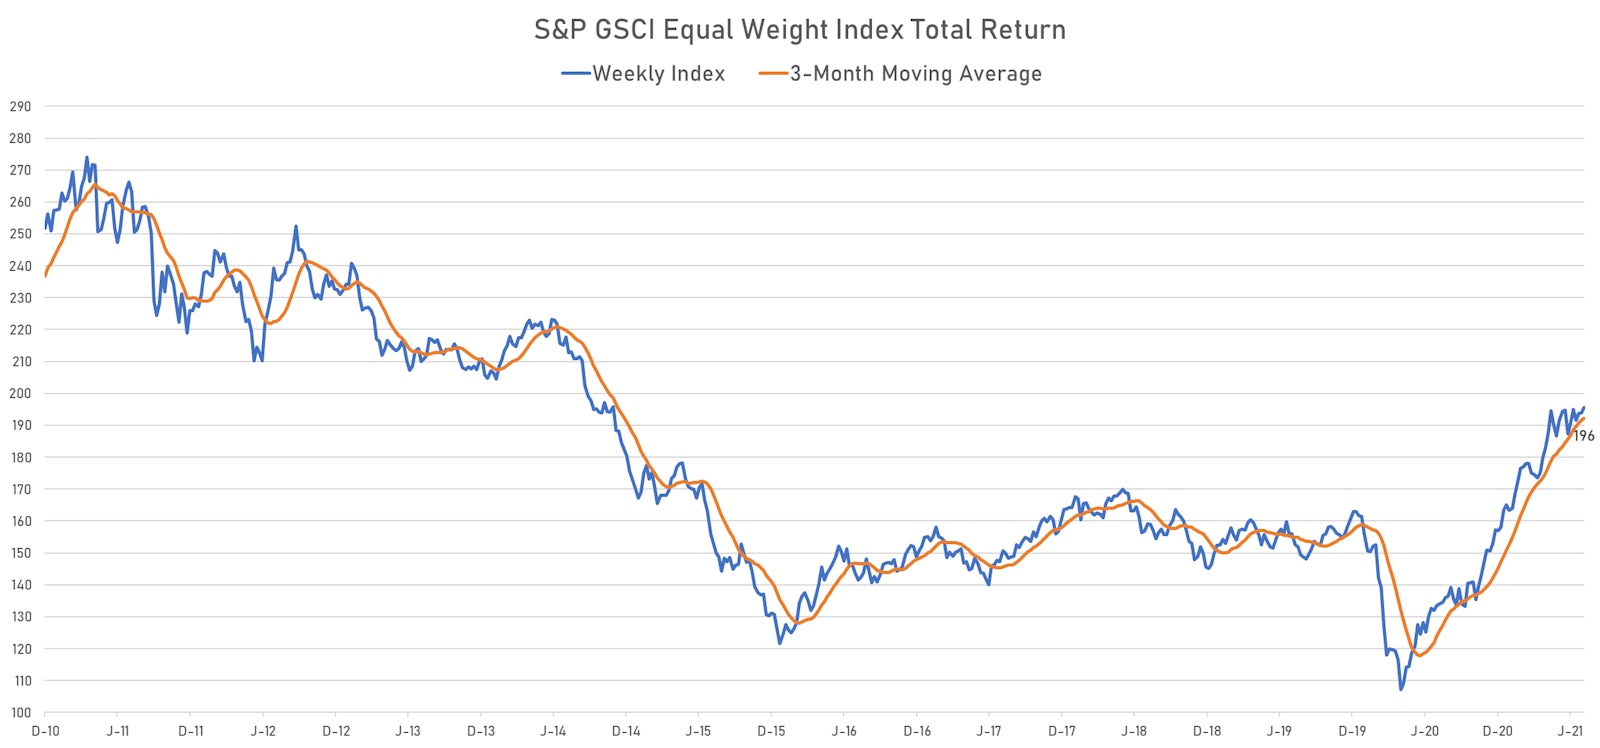 S&P GSCI Equal Weight Total Return Index Holding Above Its 3-Month Moving Average | Sources: ϕpost, Refinitiv data